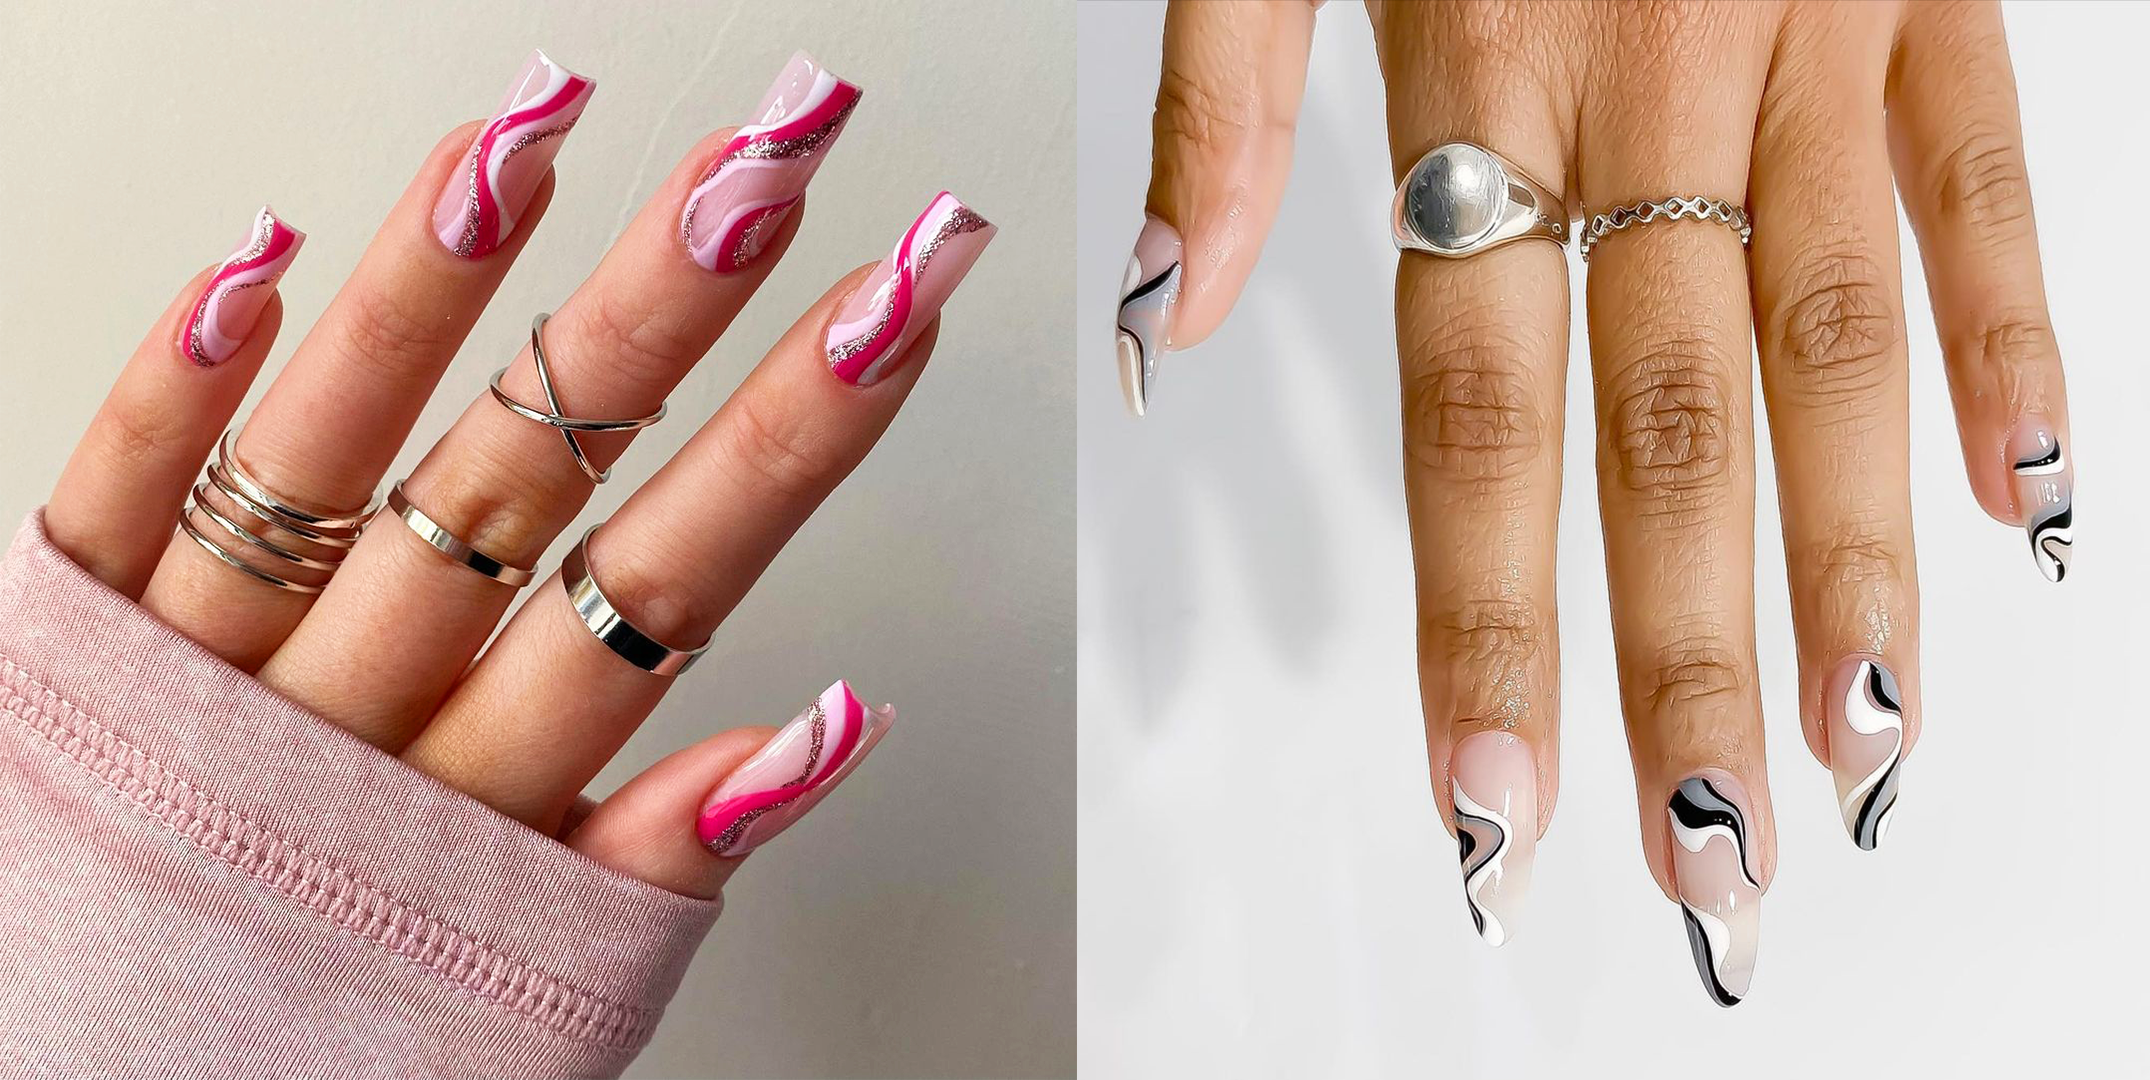 The 15 Best Acrylic Nail Designs on Instagram